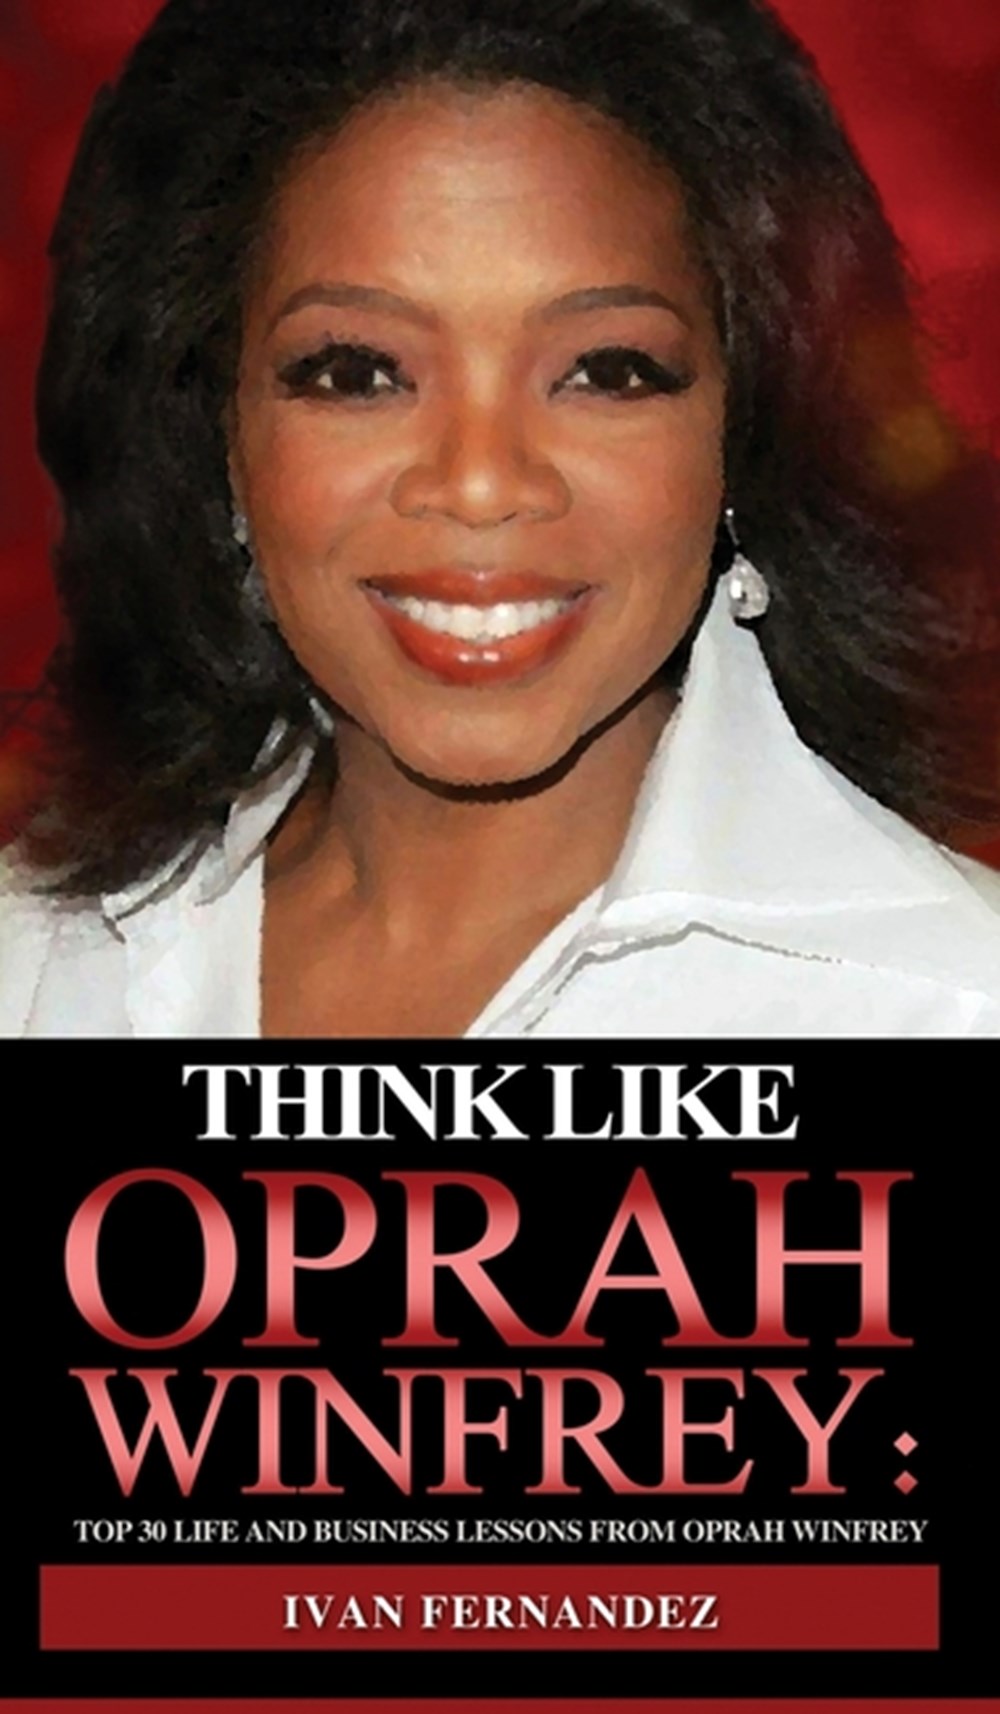 Think Like Oprah Winfrey Top 30 Life and Business Lessons from Oprah Winfrey